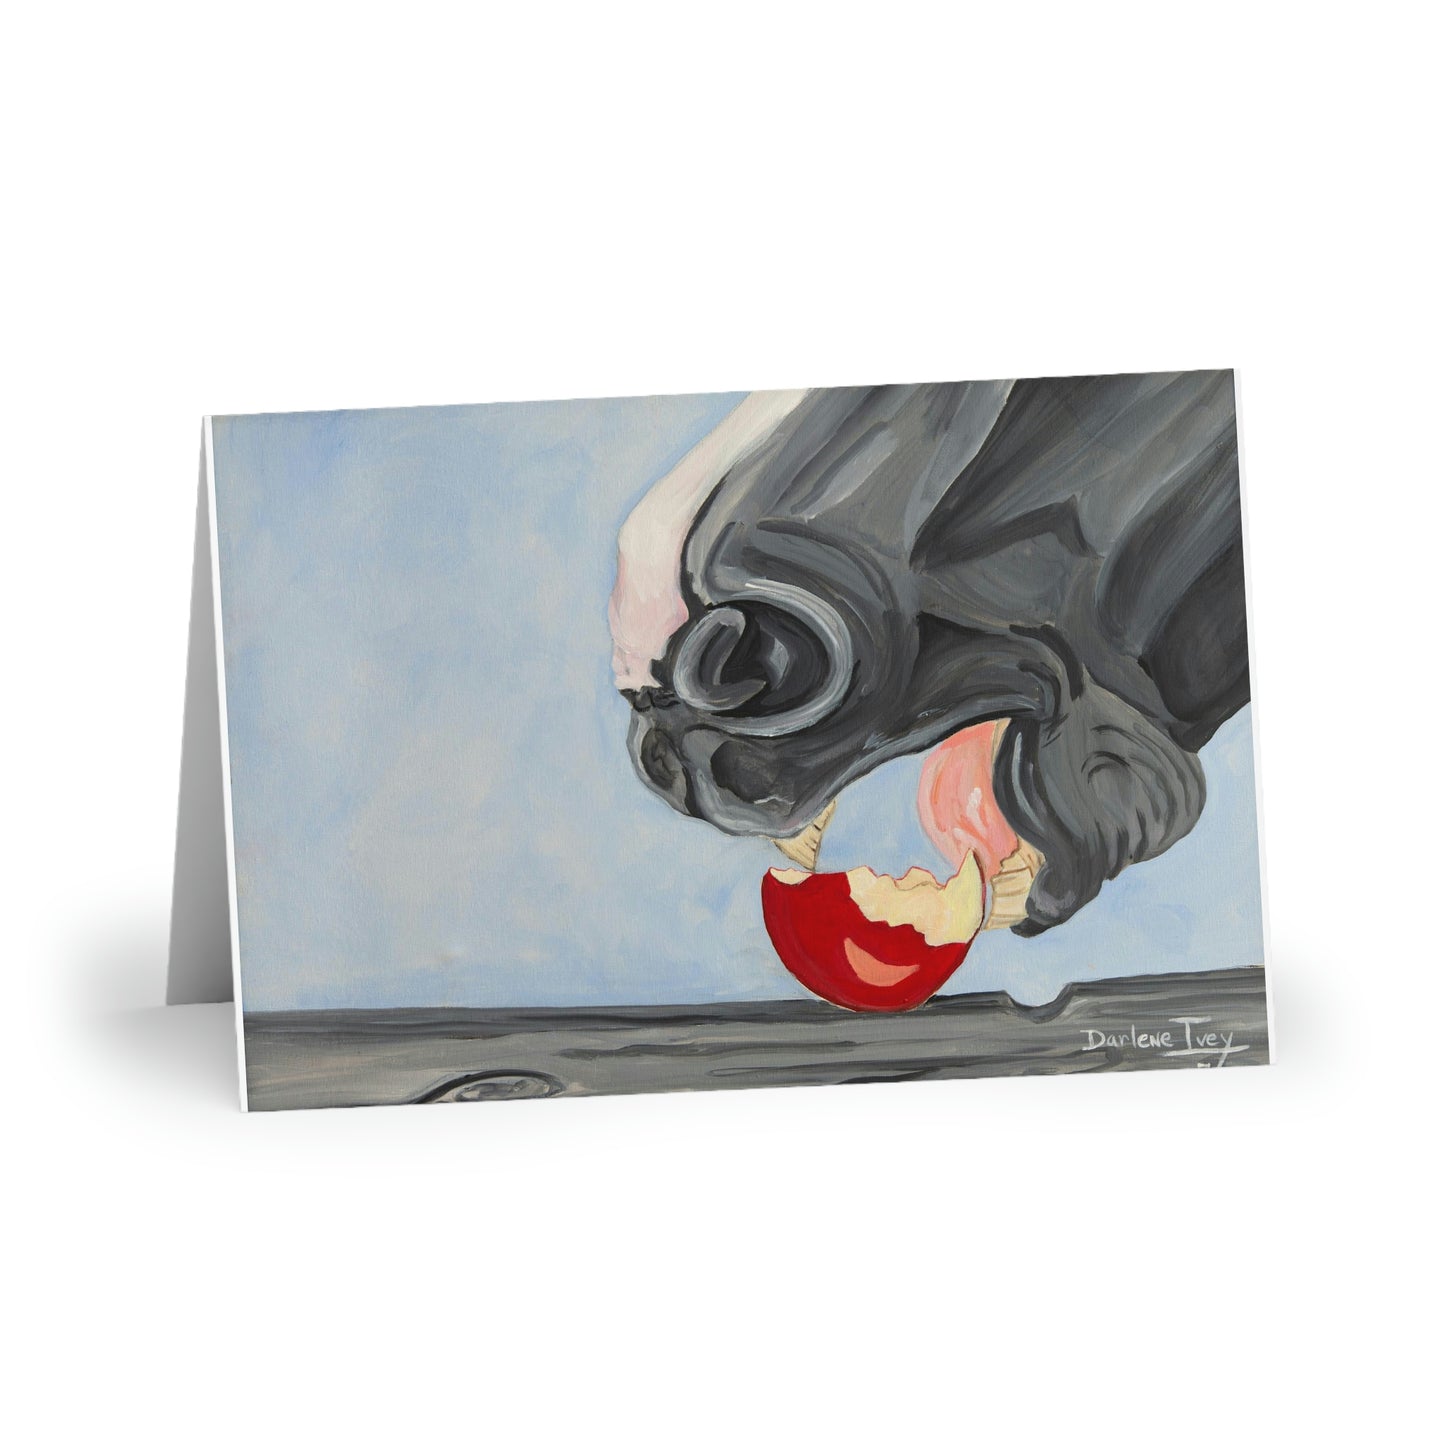 The Apple Greeting cards